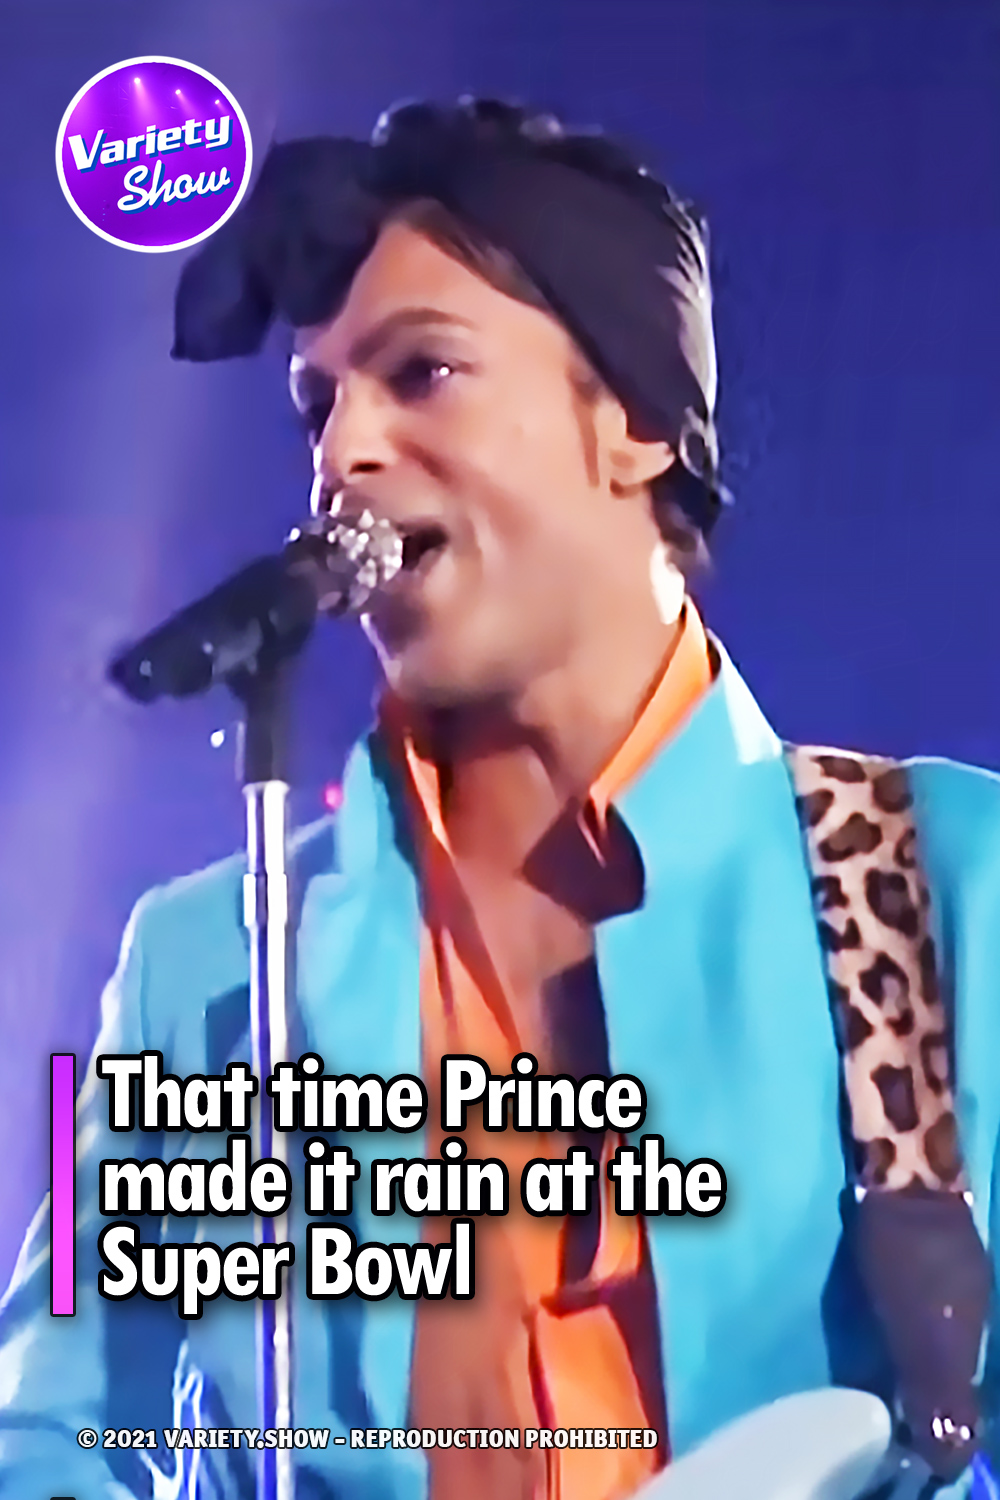 That time Prince made it rain at the Super Bowl